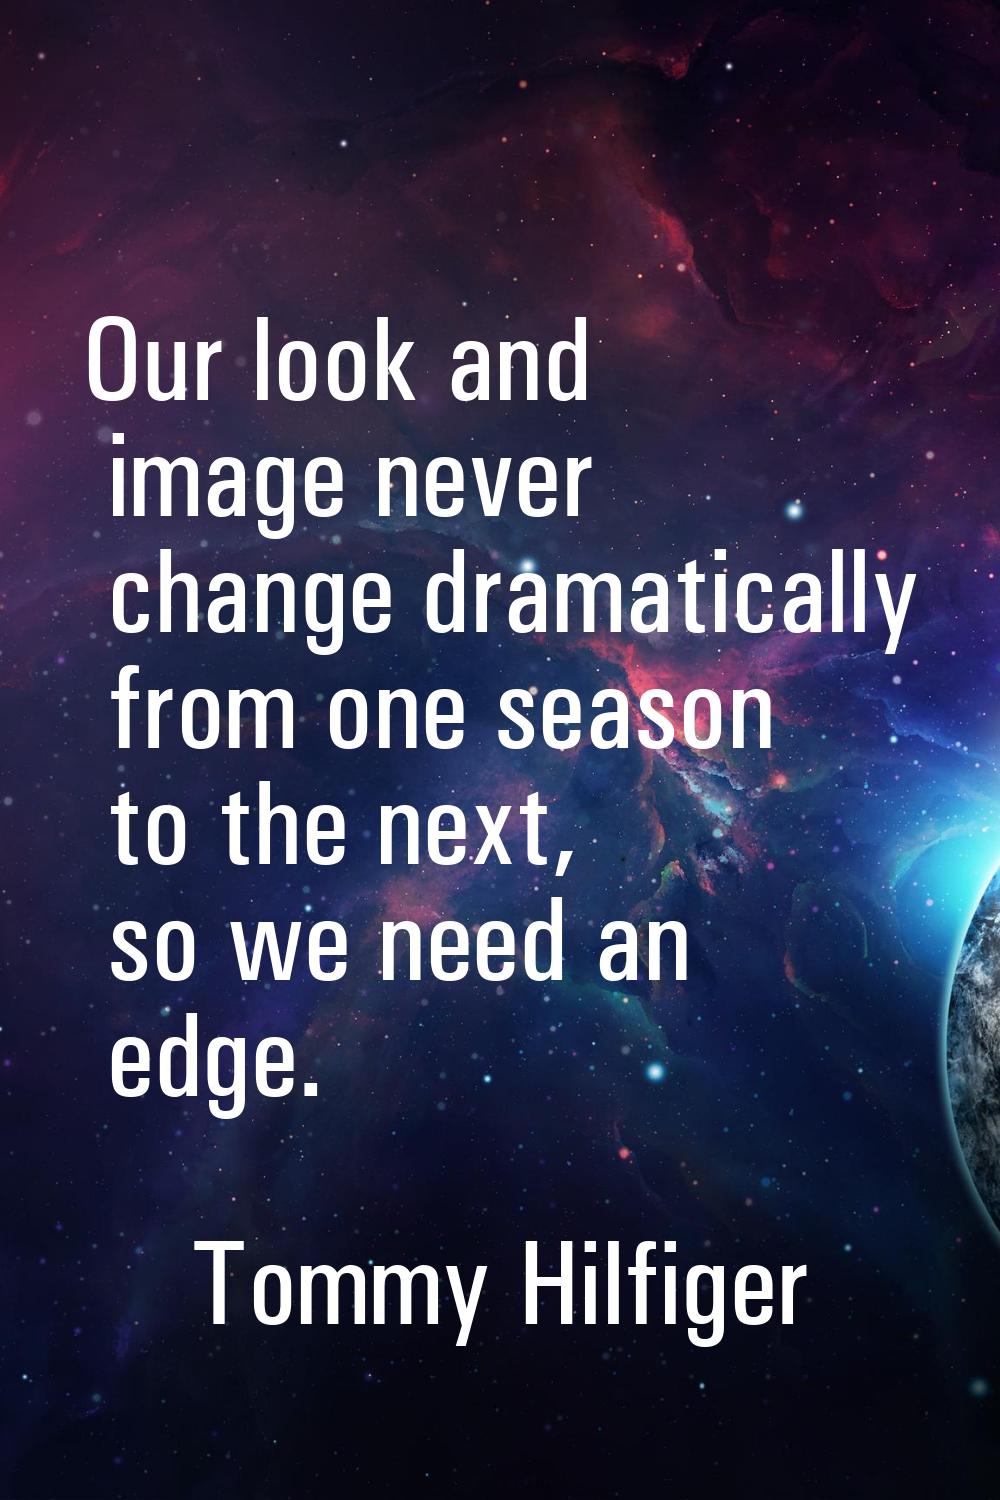 Our look and image never change dramatically from one season to the next, so we need an edge.